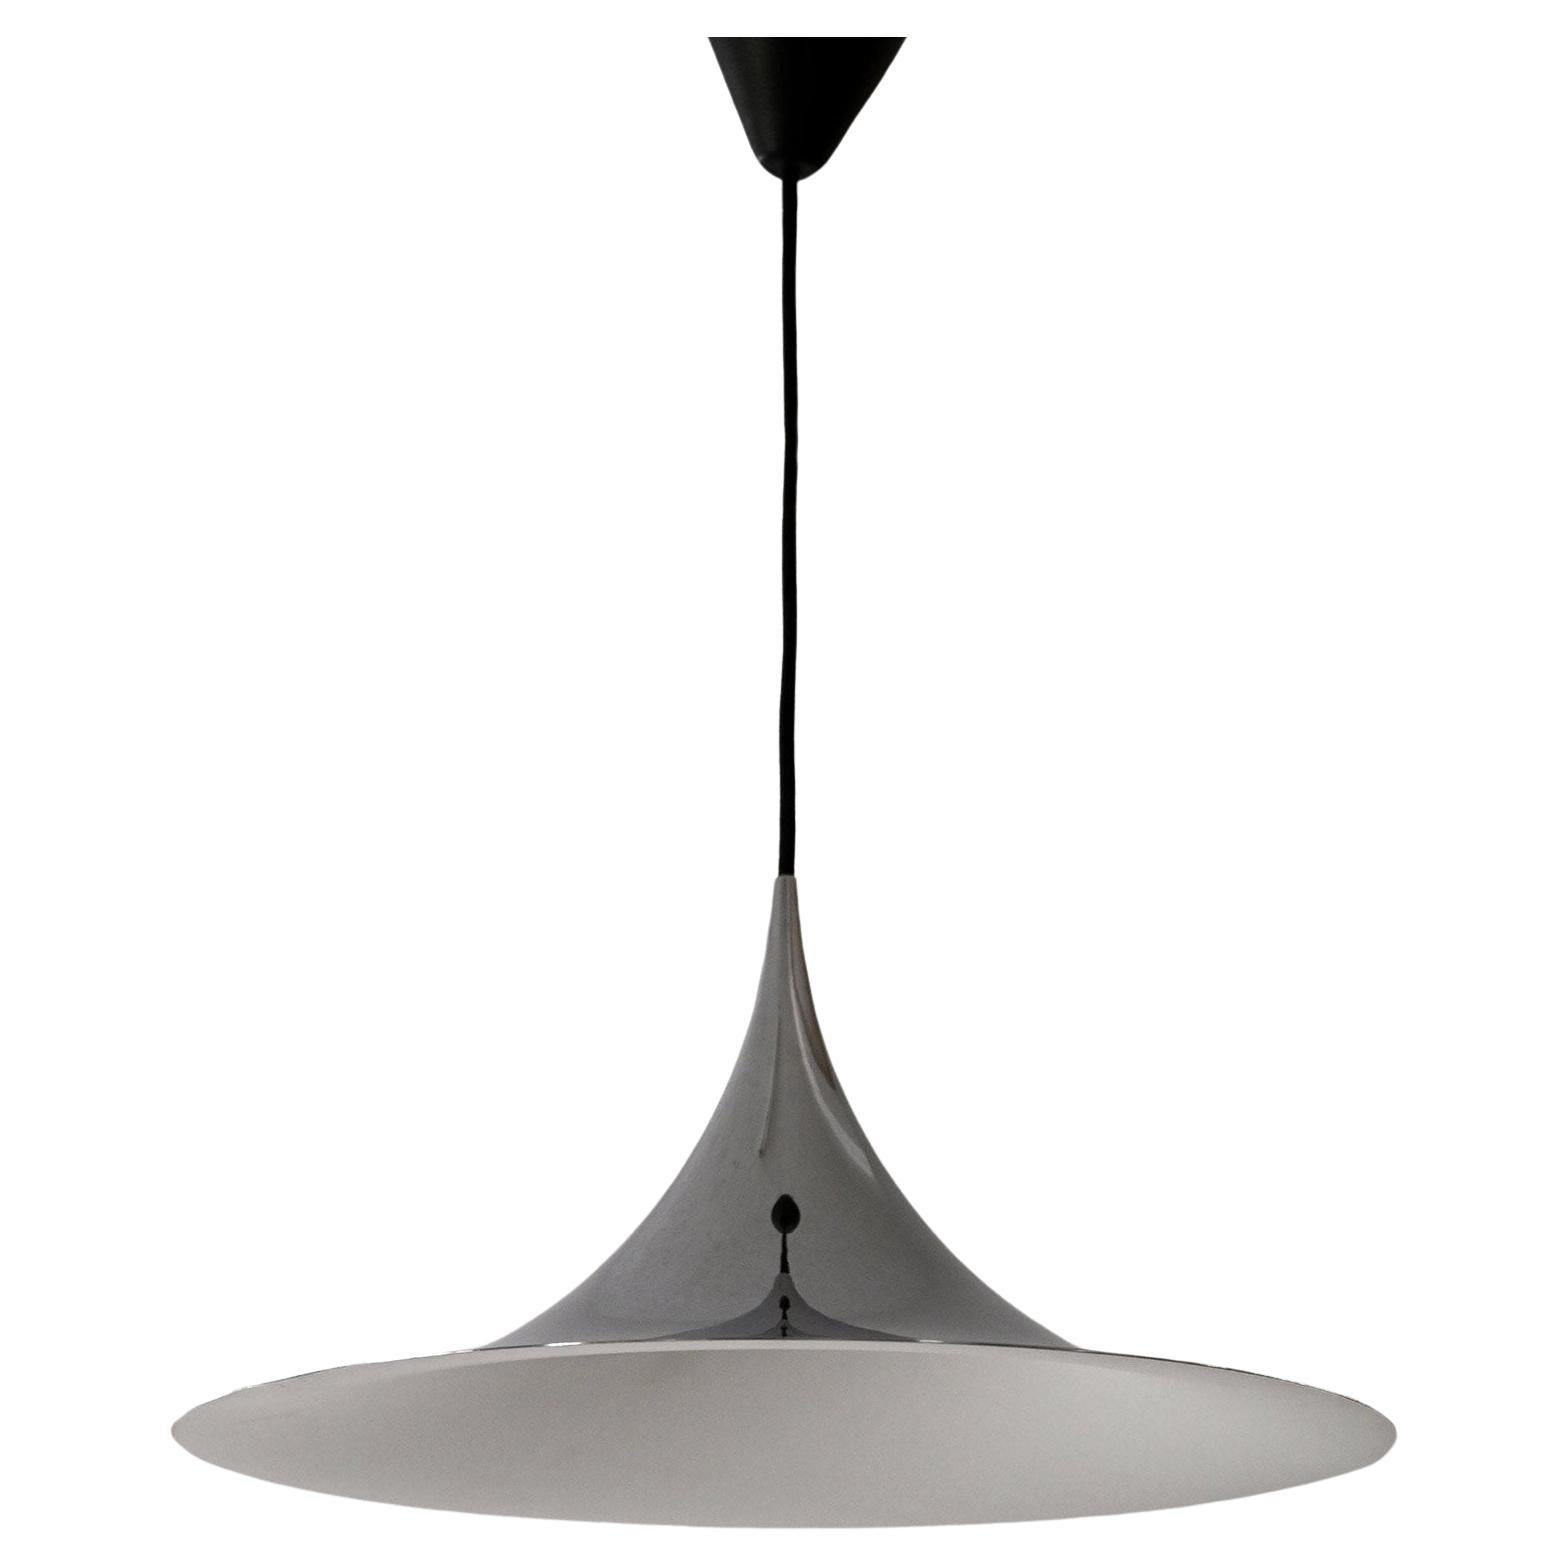 Silver metal pendant lamp by Bonderup & Thorsten For Sale